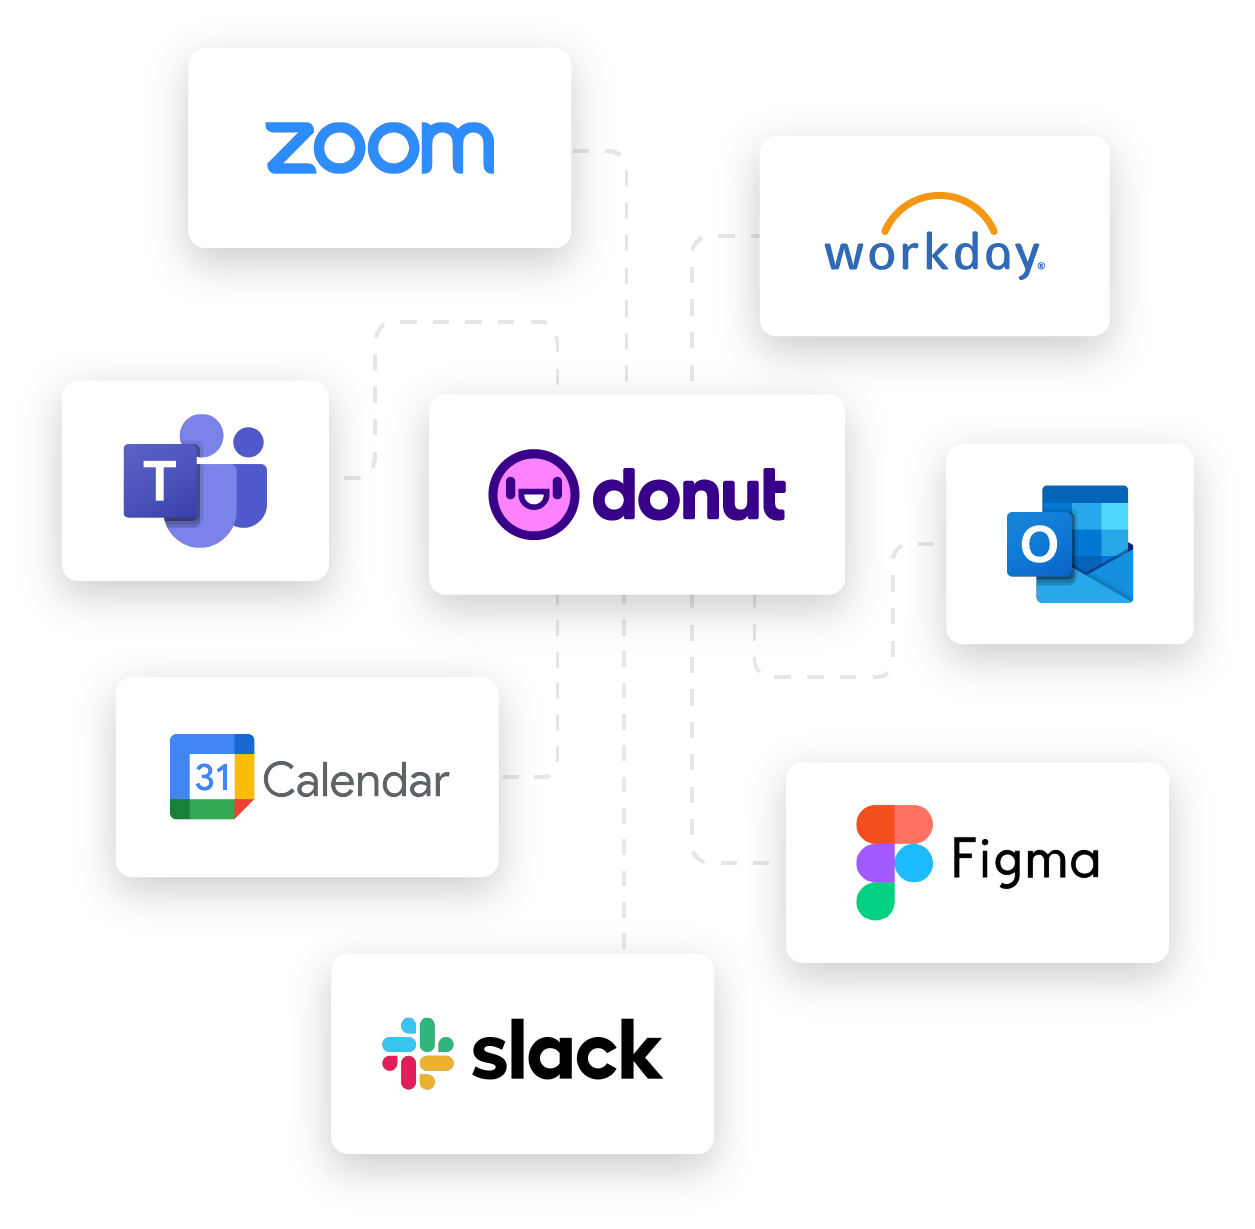 Logos of platforms that Donut integrates with including: Slack, Microsoft Teams, Zoom, Workday, Outlook, Google Calendar, and Figma